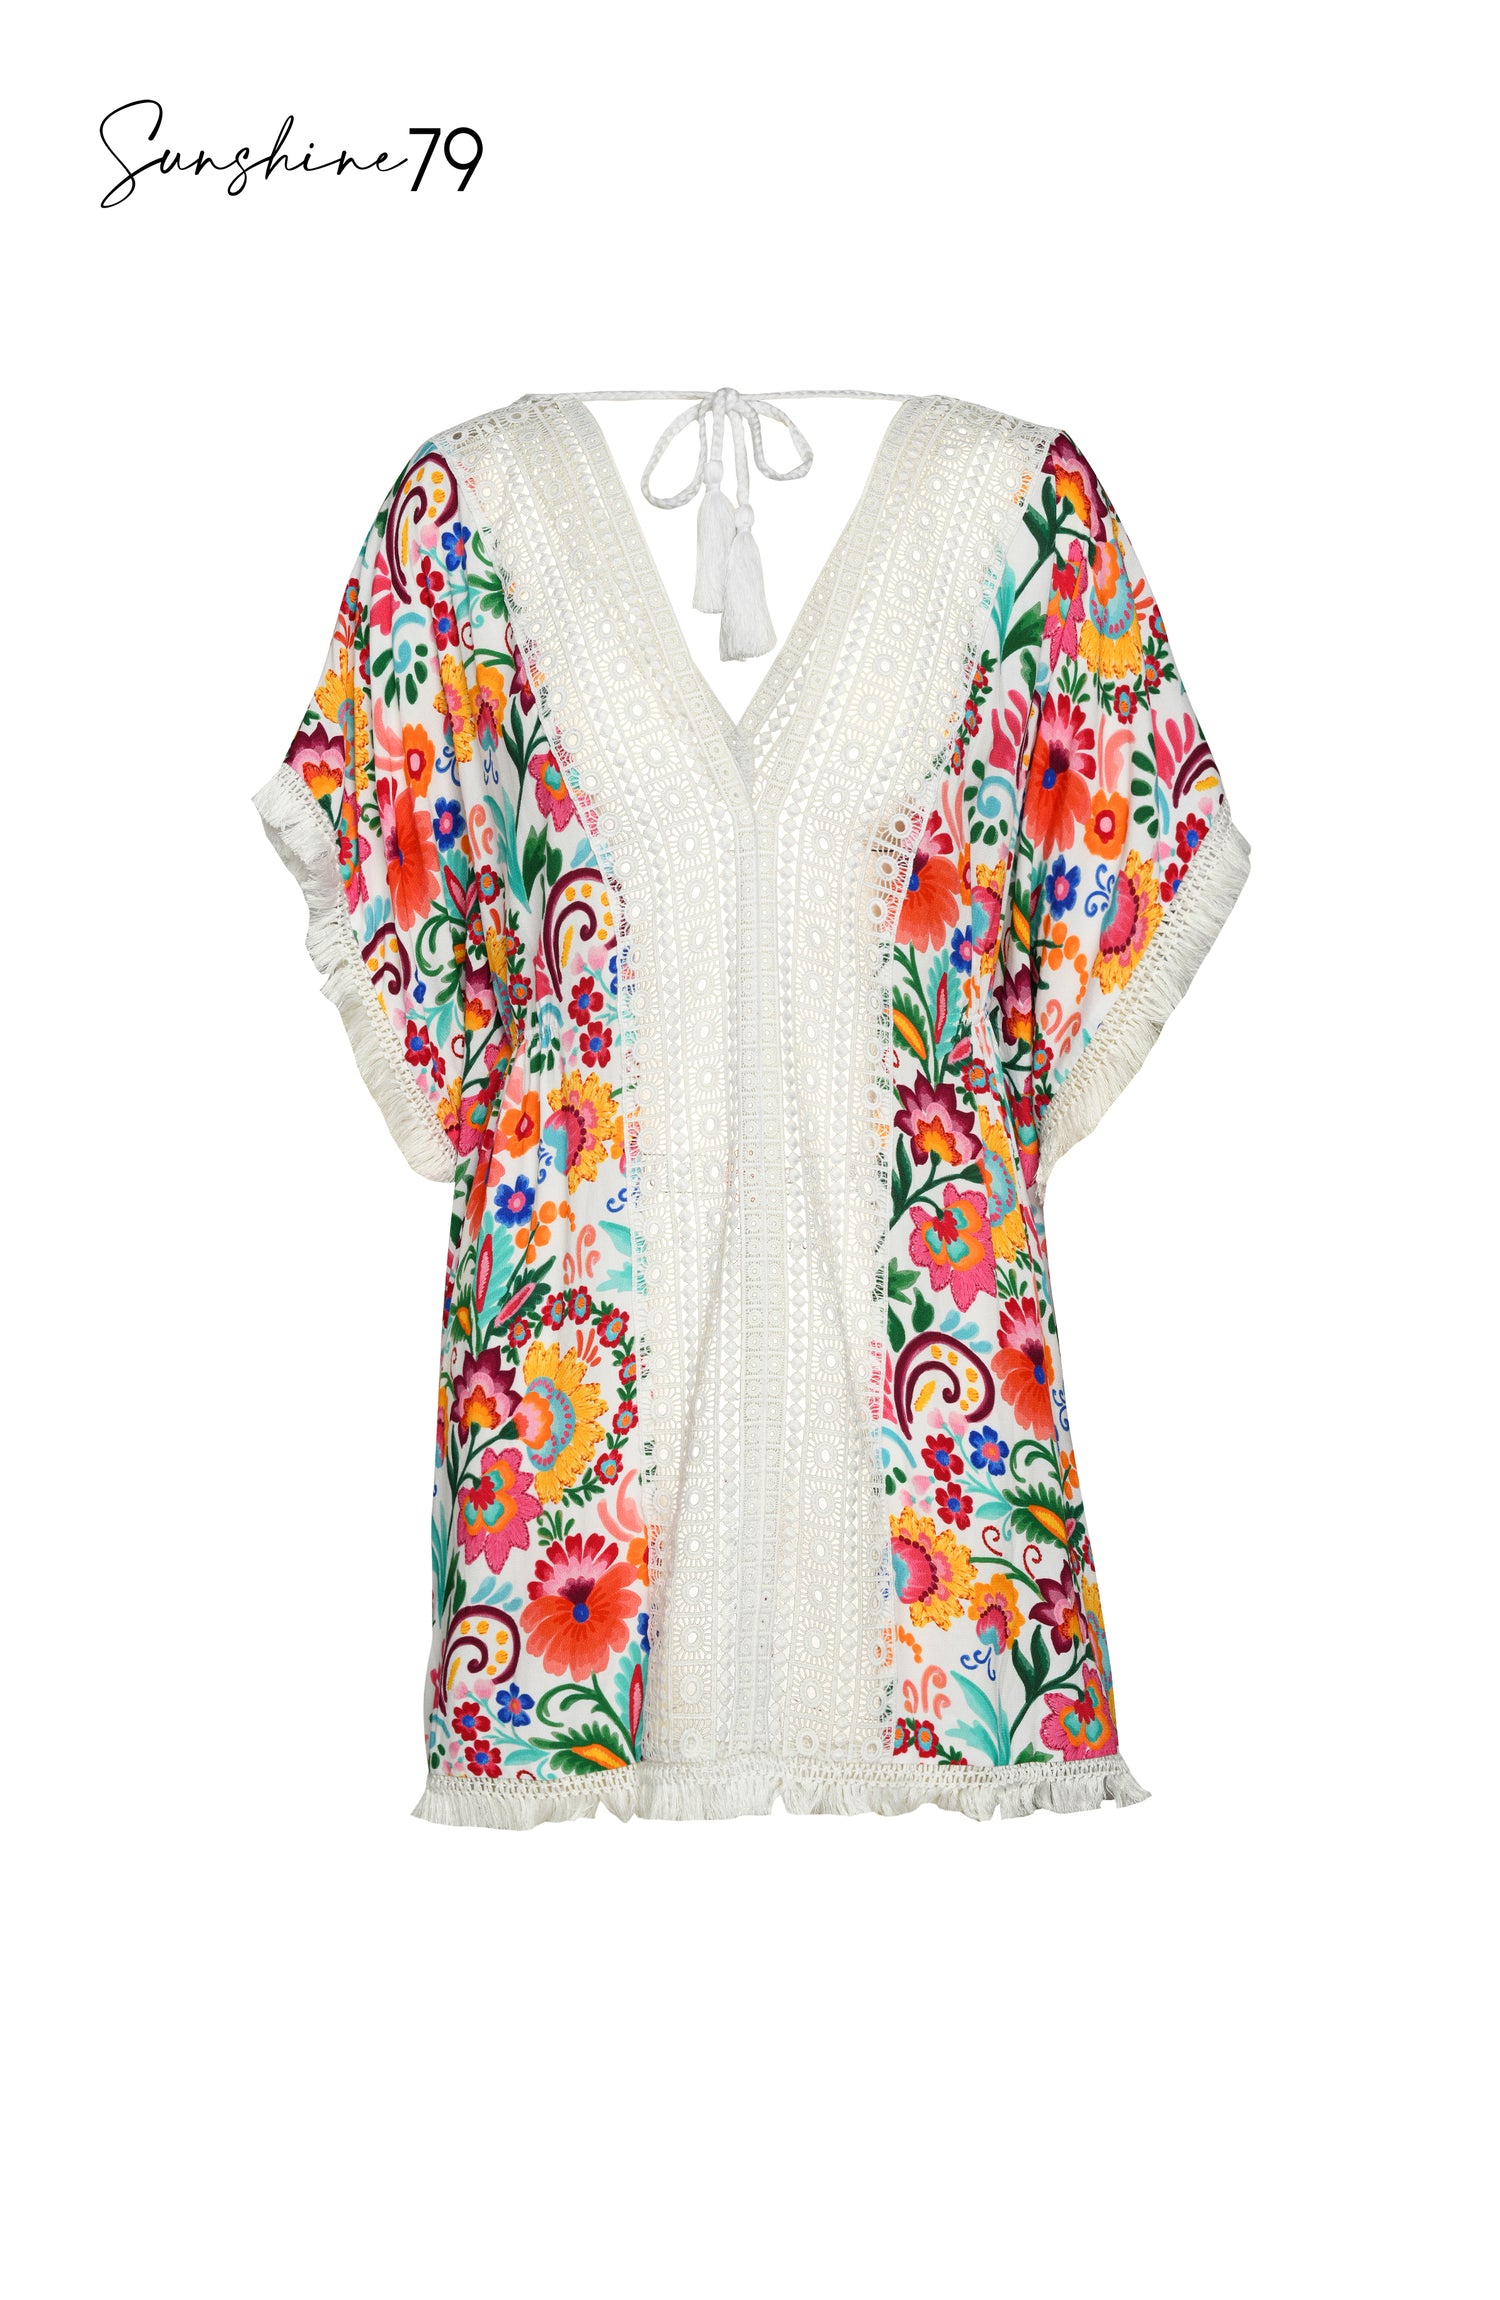 Floral swimsuit cover-up with crochet detailing